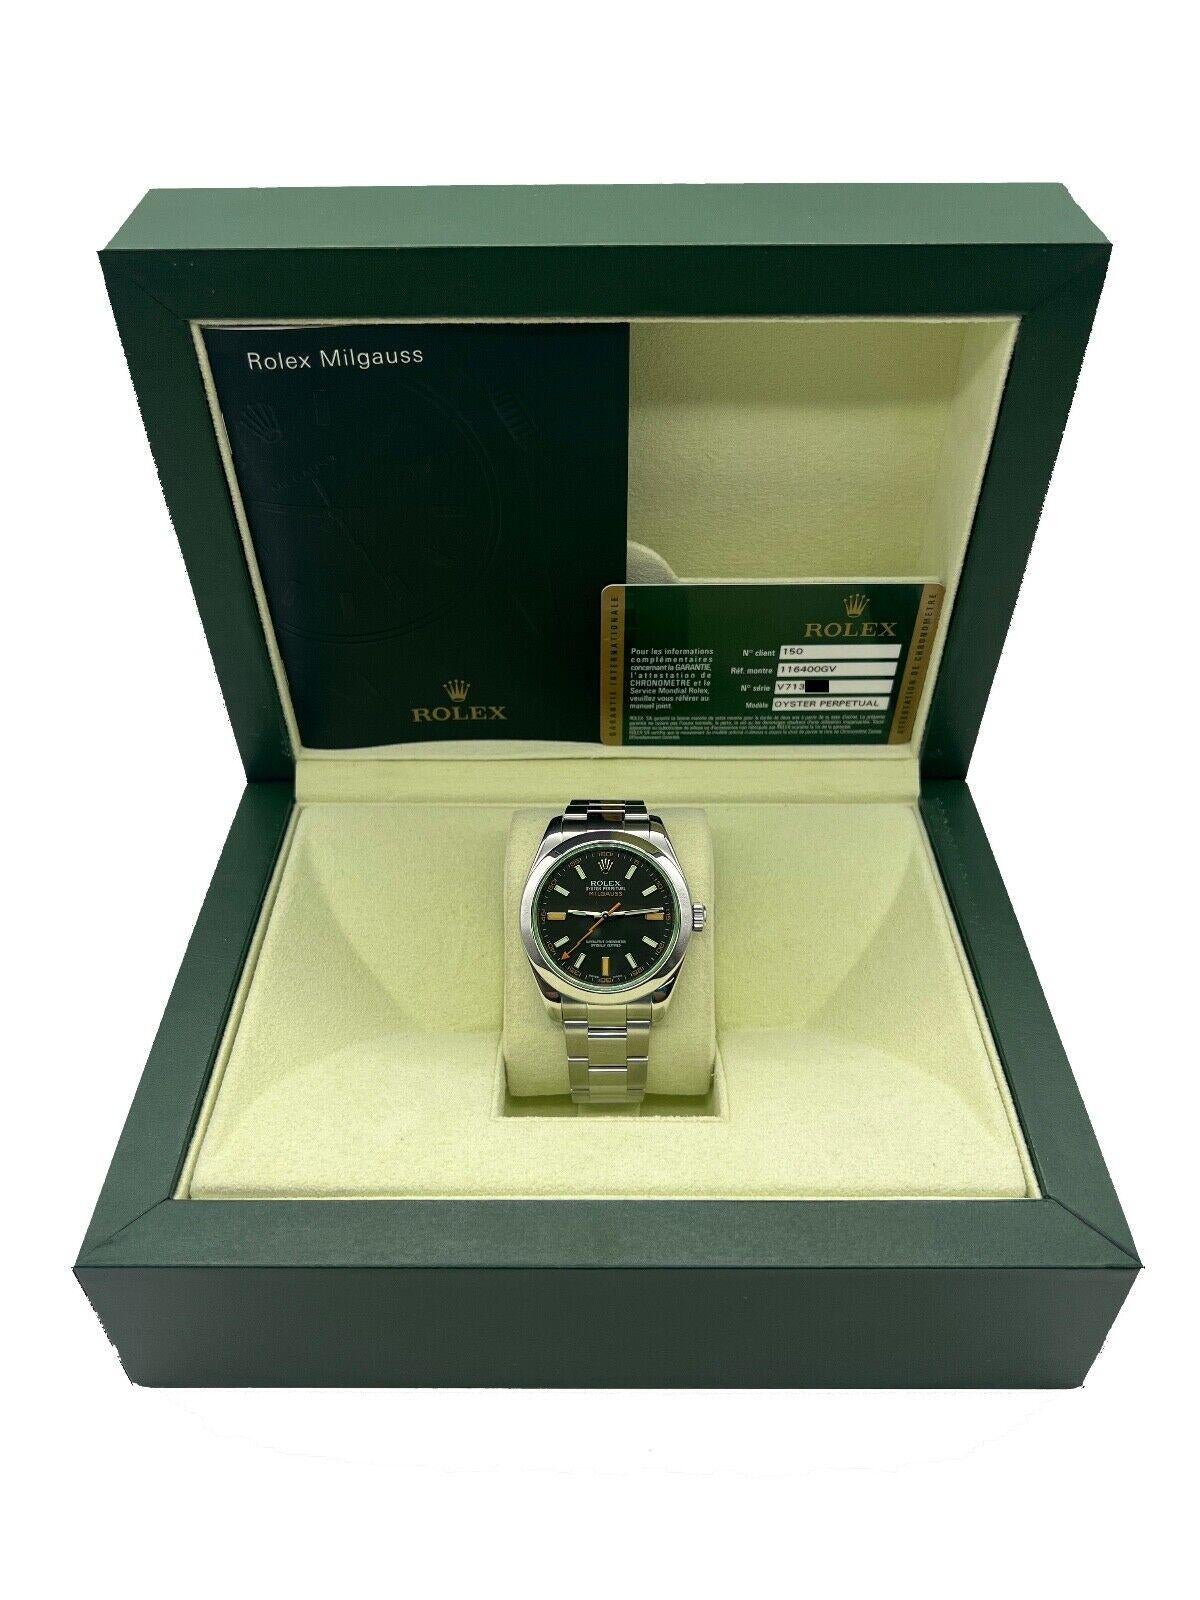 Rolex Milgauss 116400GV Black Dial Green Crystal Stainless Steel Box Paper 2